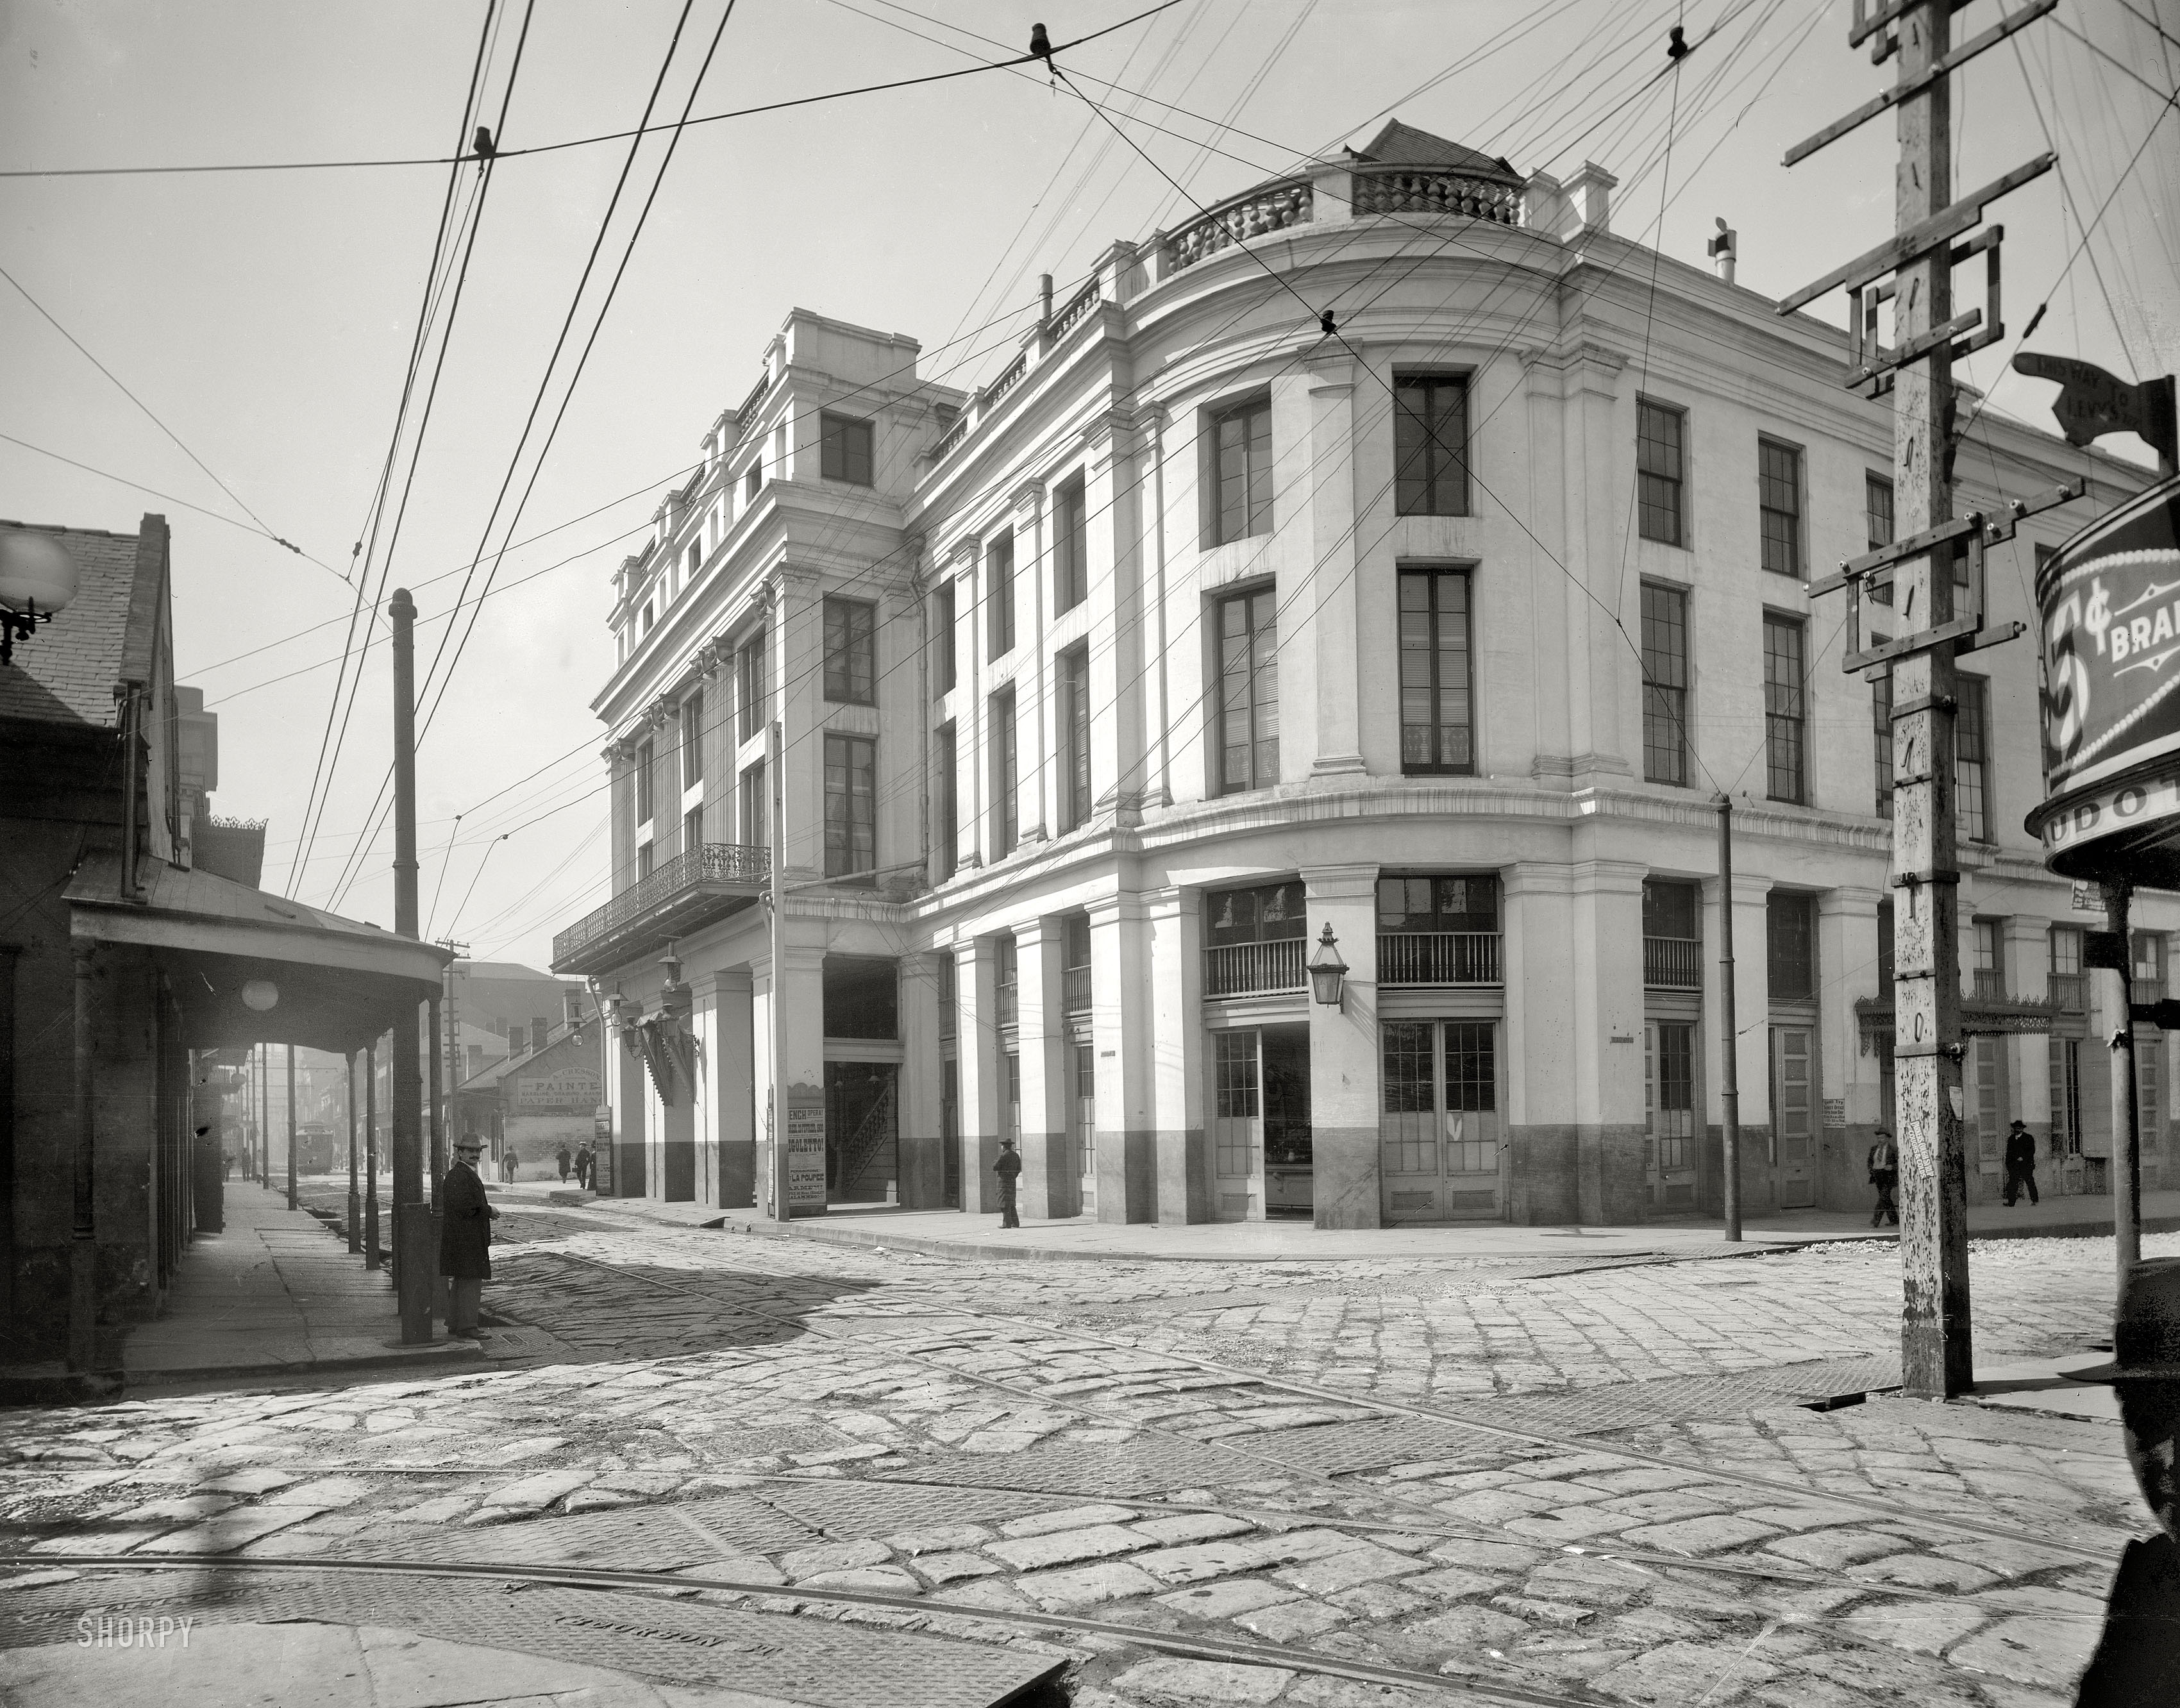 Circa February 1900. "French Opera House, New Orleans." 8x10 inch dry plate glass negative, Detroit Publishing Company. View full size.